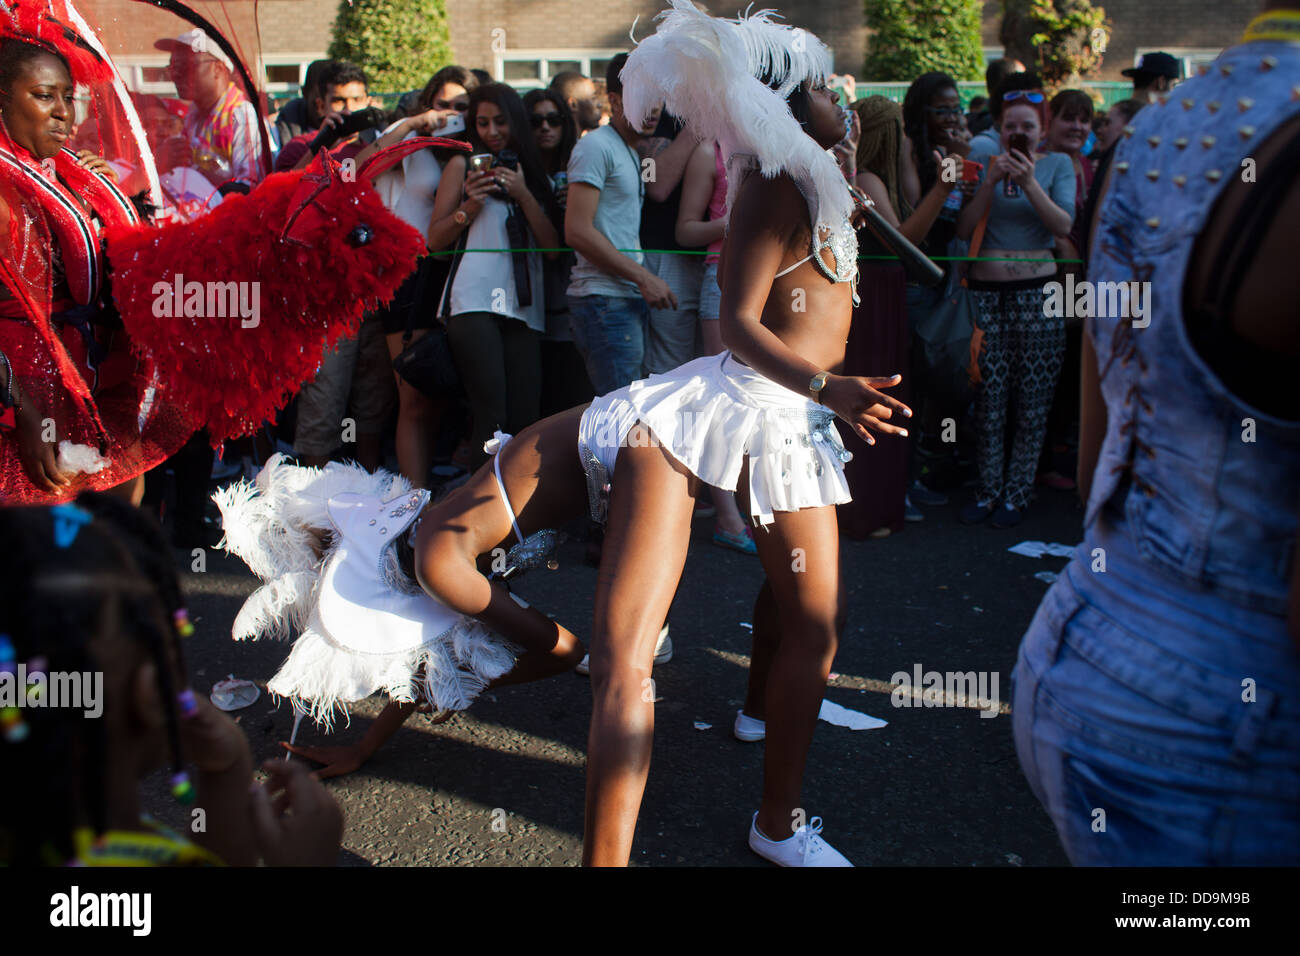 Performers of the Notting Hill Carnival dance bum to bum wearing white costumes to the joy of the spectators. Stock Photo